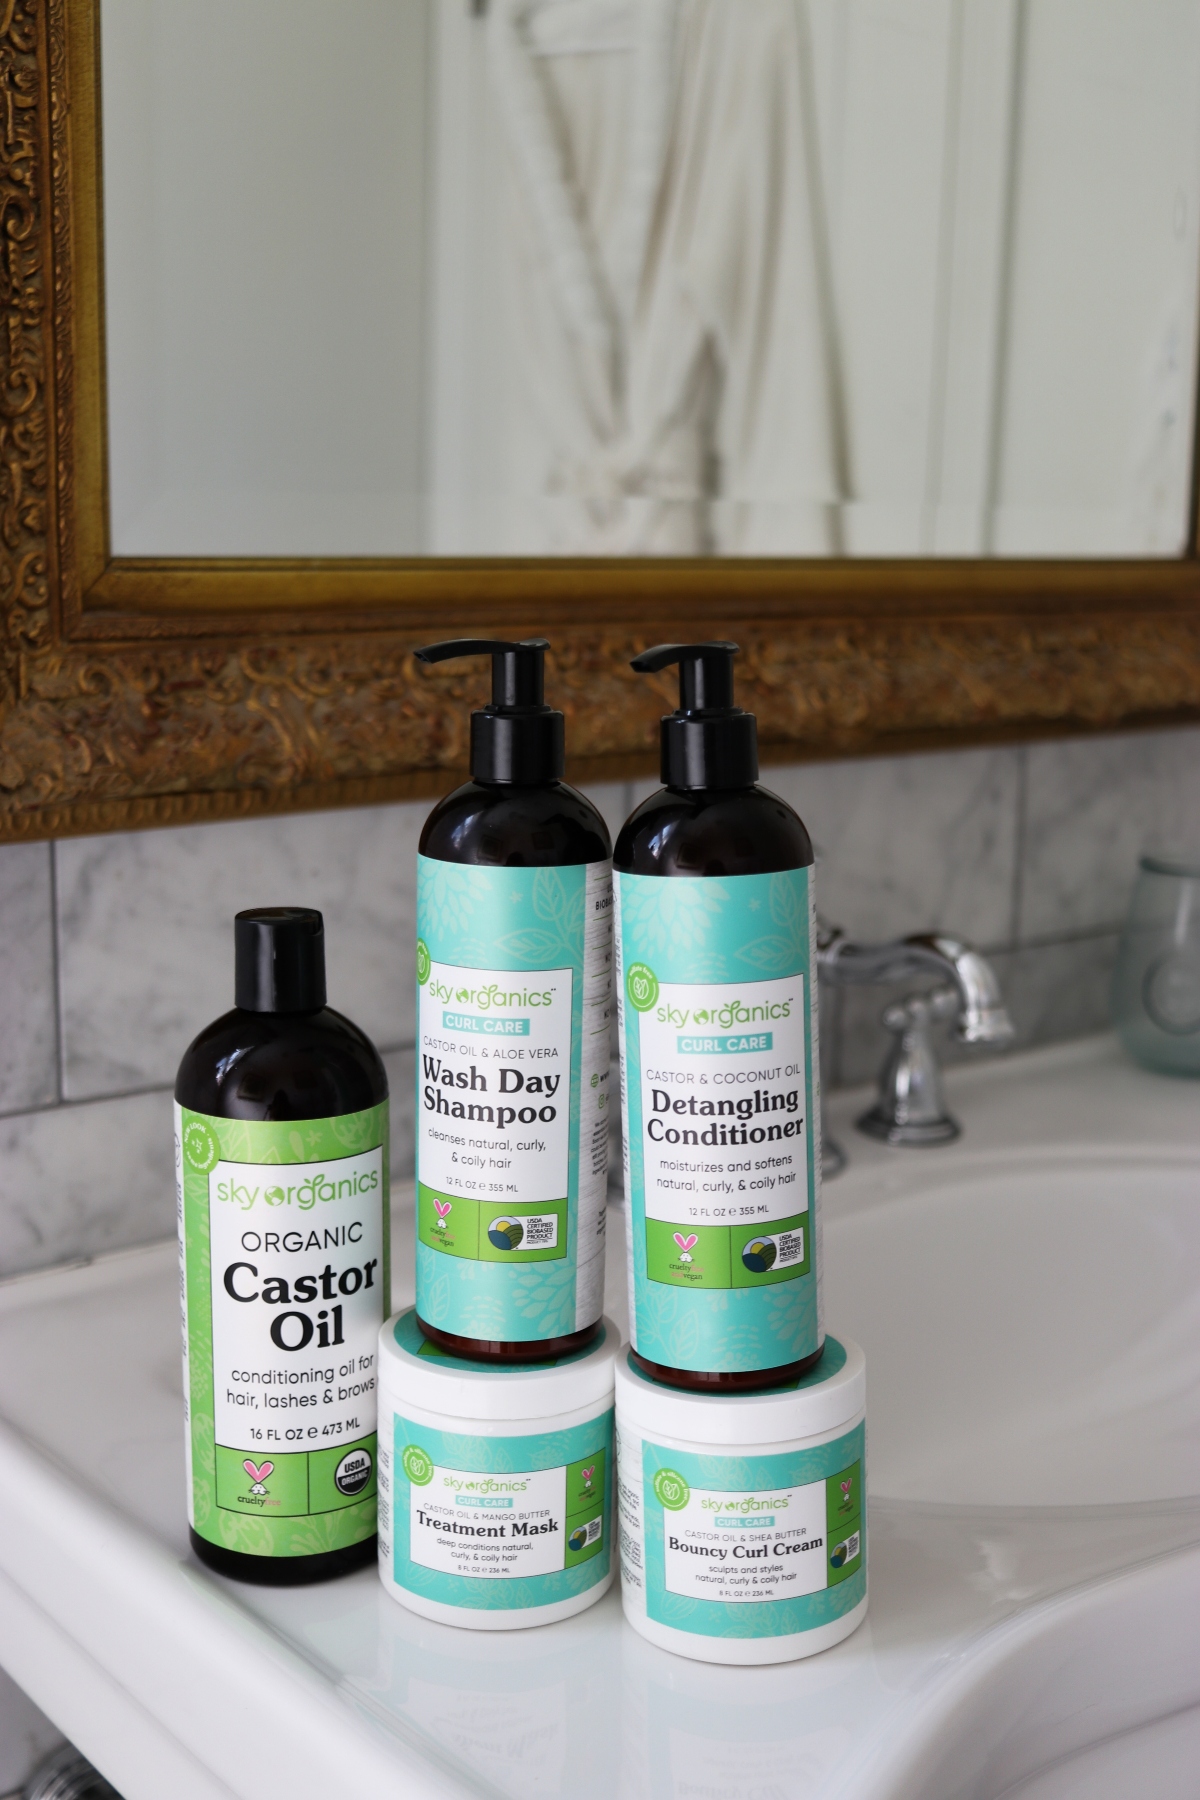 Sky Organics Curl Care Hair Products Available at Walmart